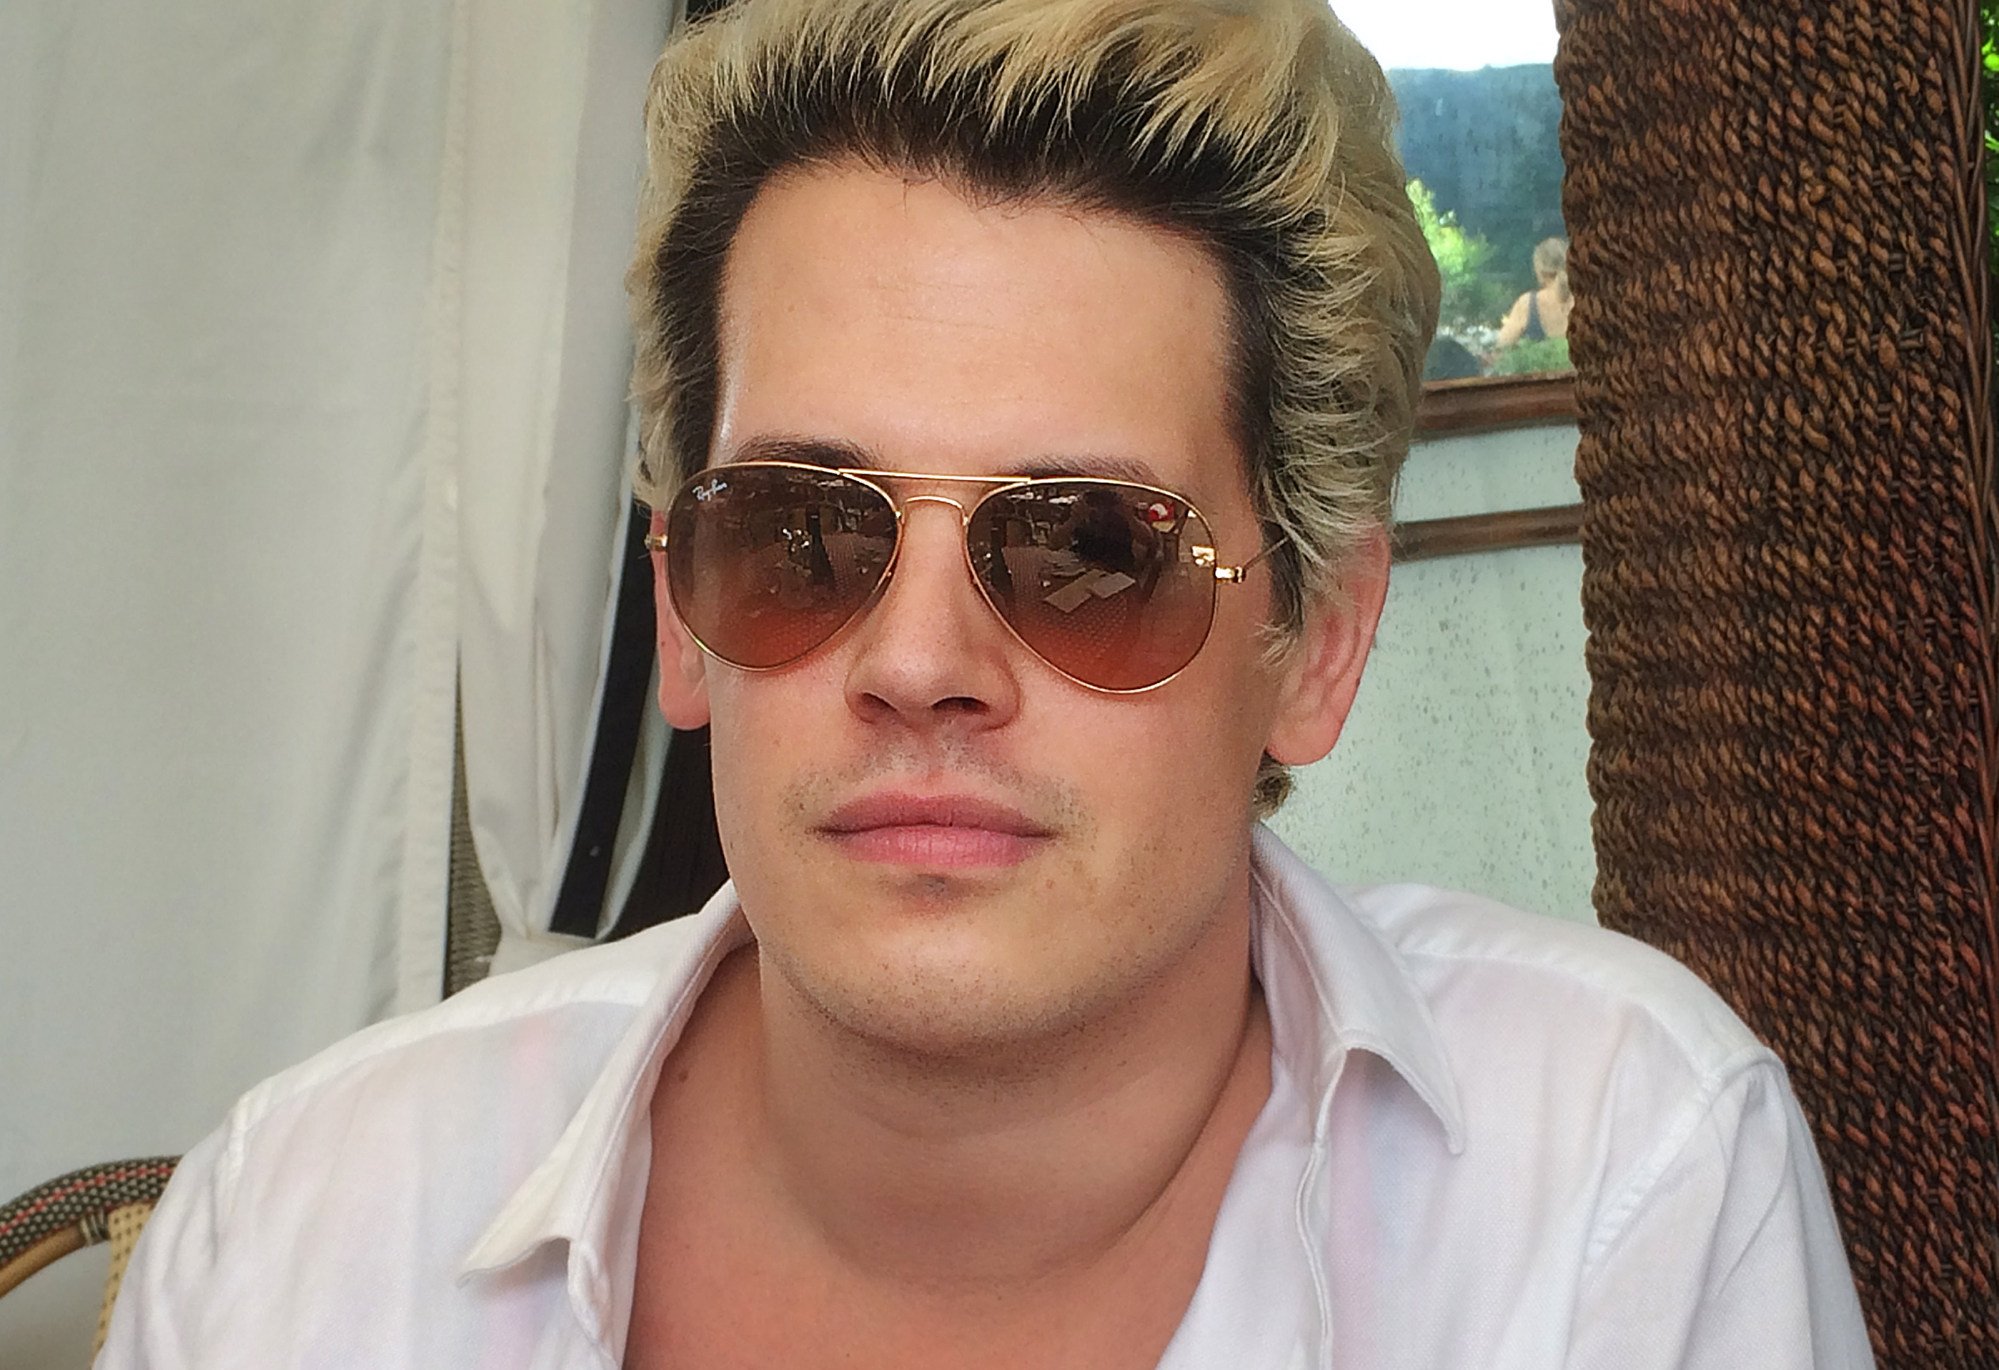 Who is Milo Yiannopoulos, Kanye West’s new right hand man? Taking on